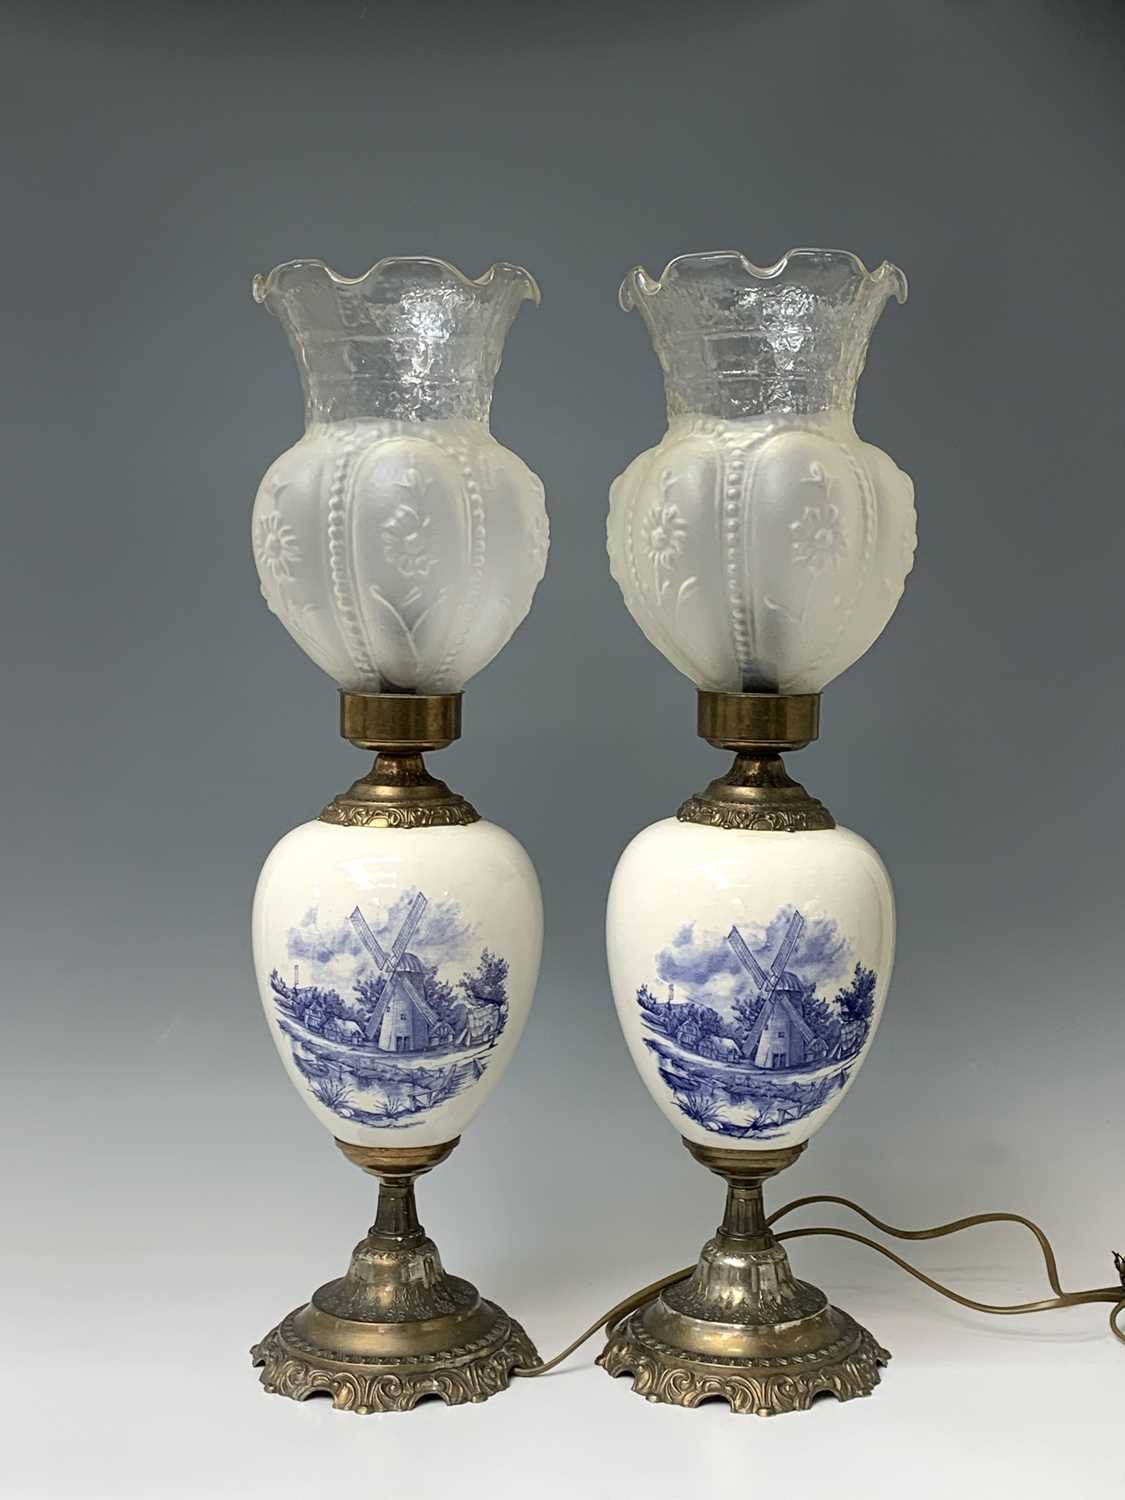 A pair of 20th century gilt metal mounted Delft table lamps with glass shades. Height 60.5cm. - Image 11 of 11